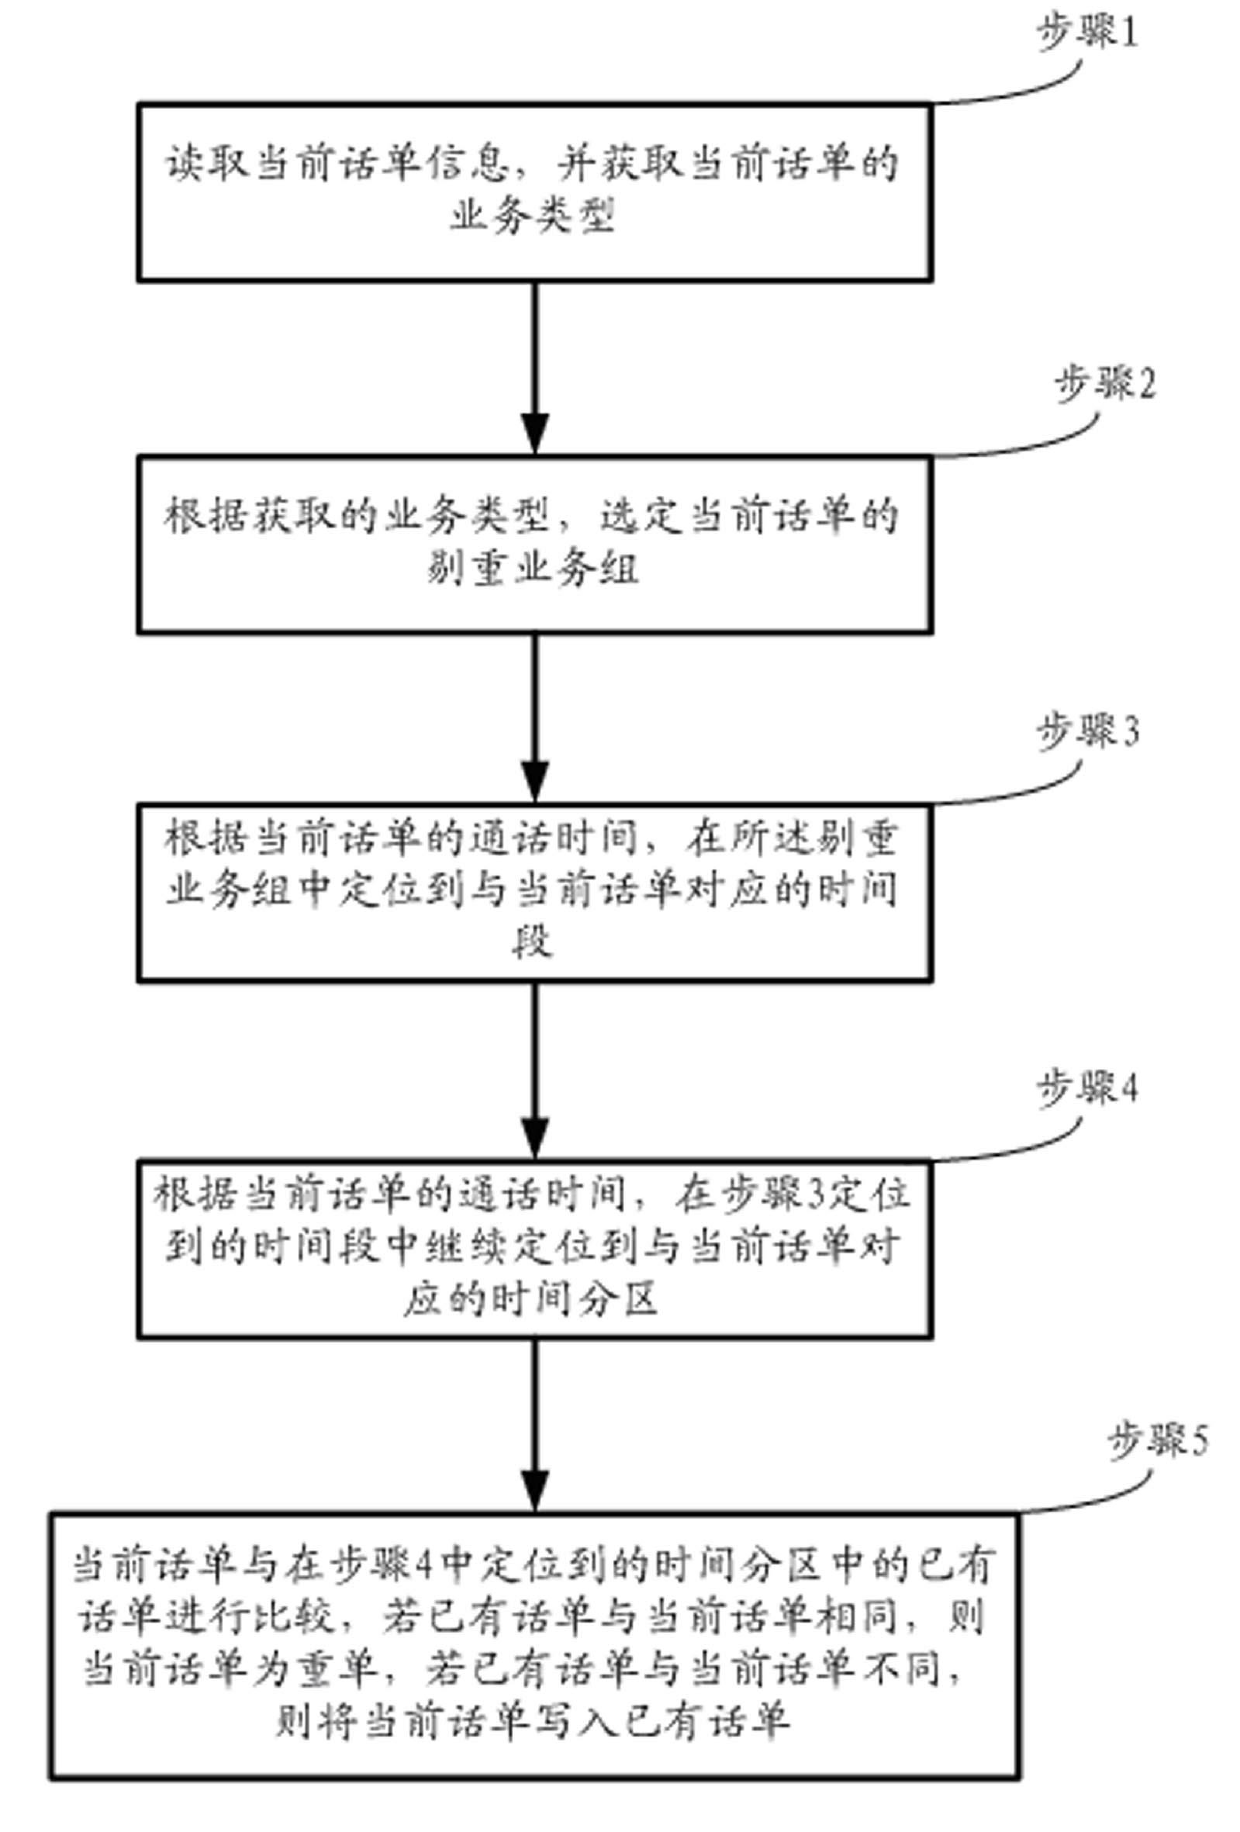 Repeated ticket removing method